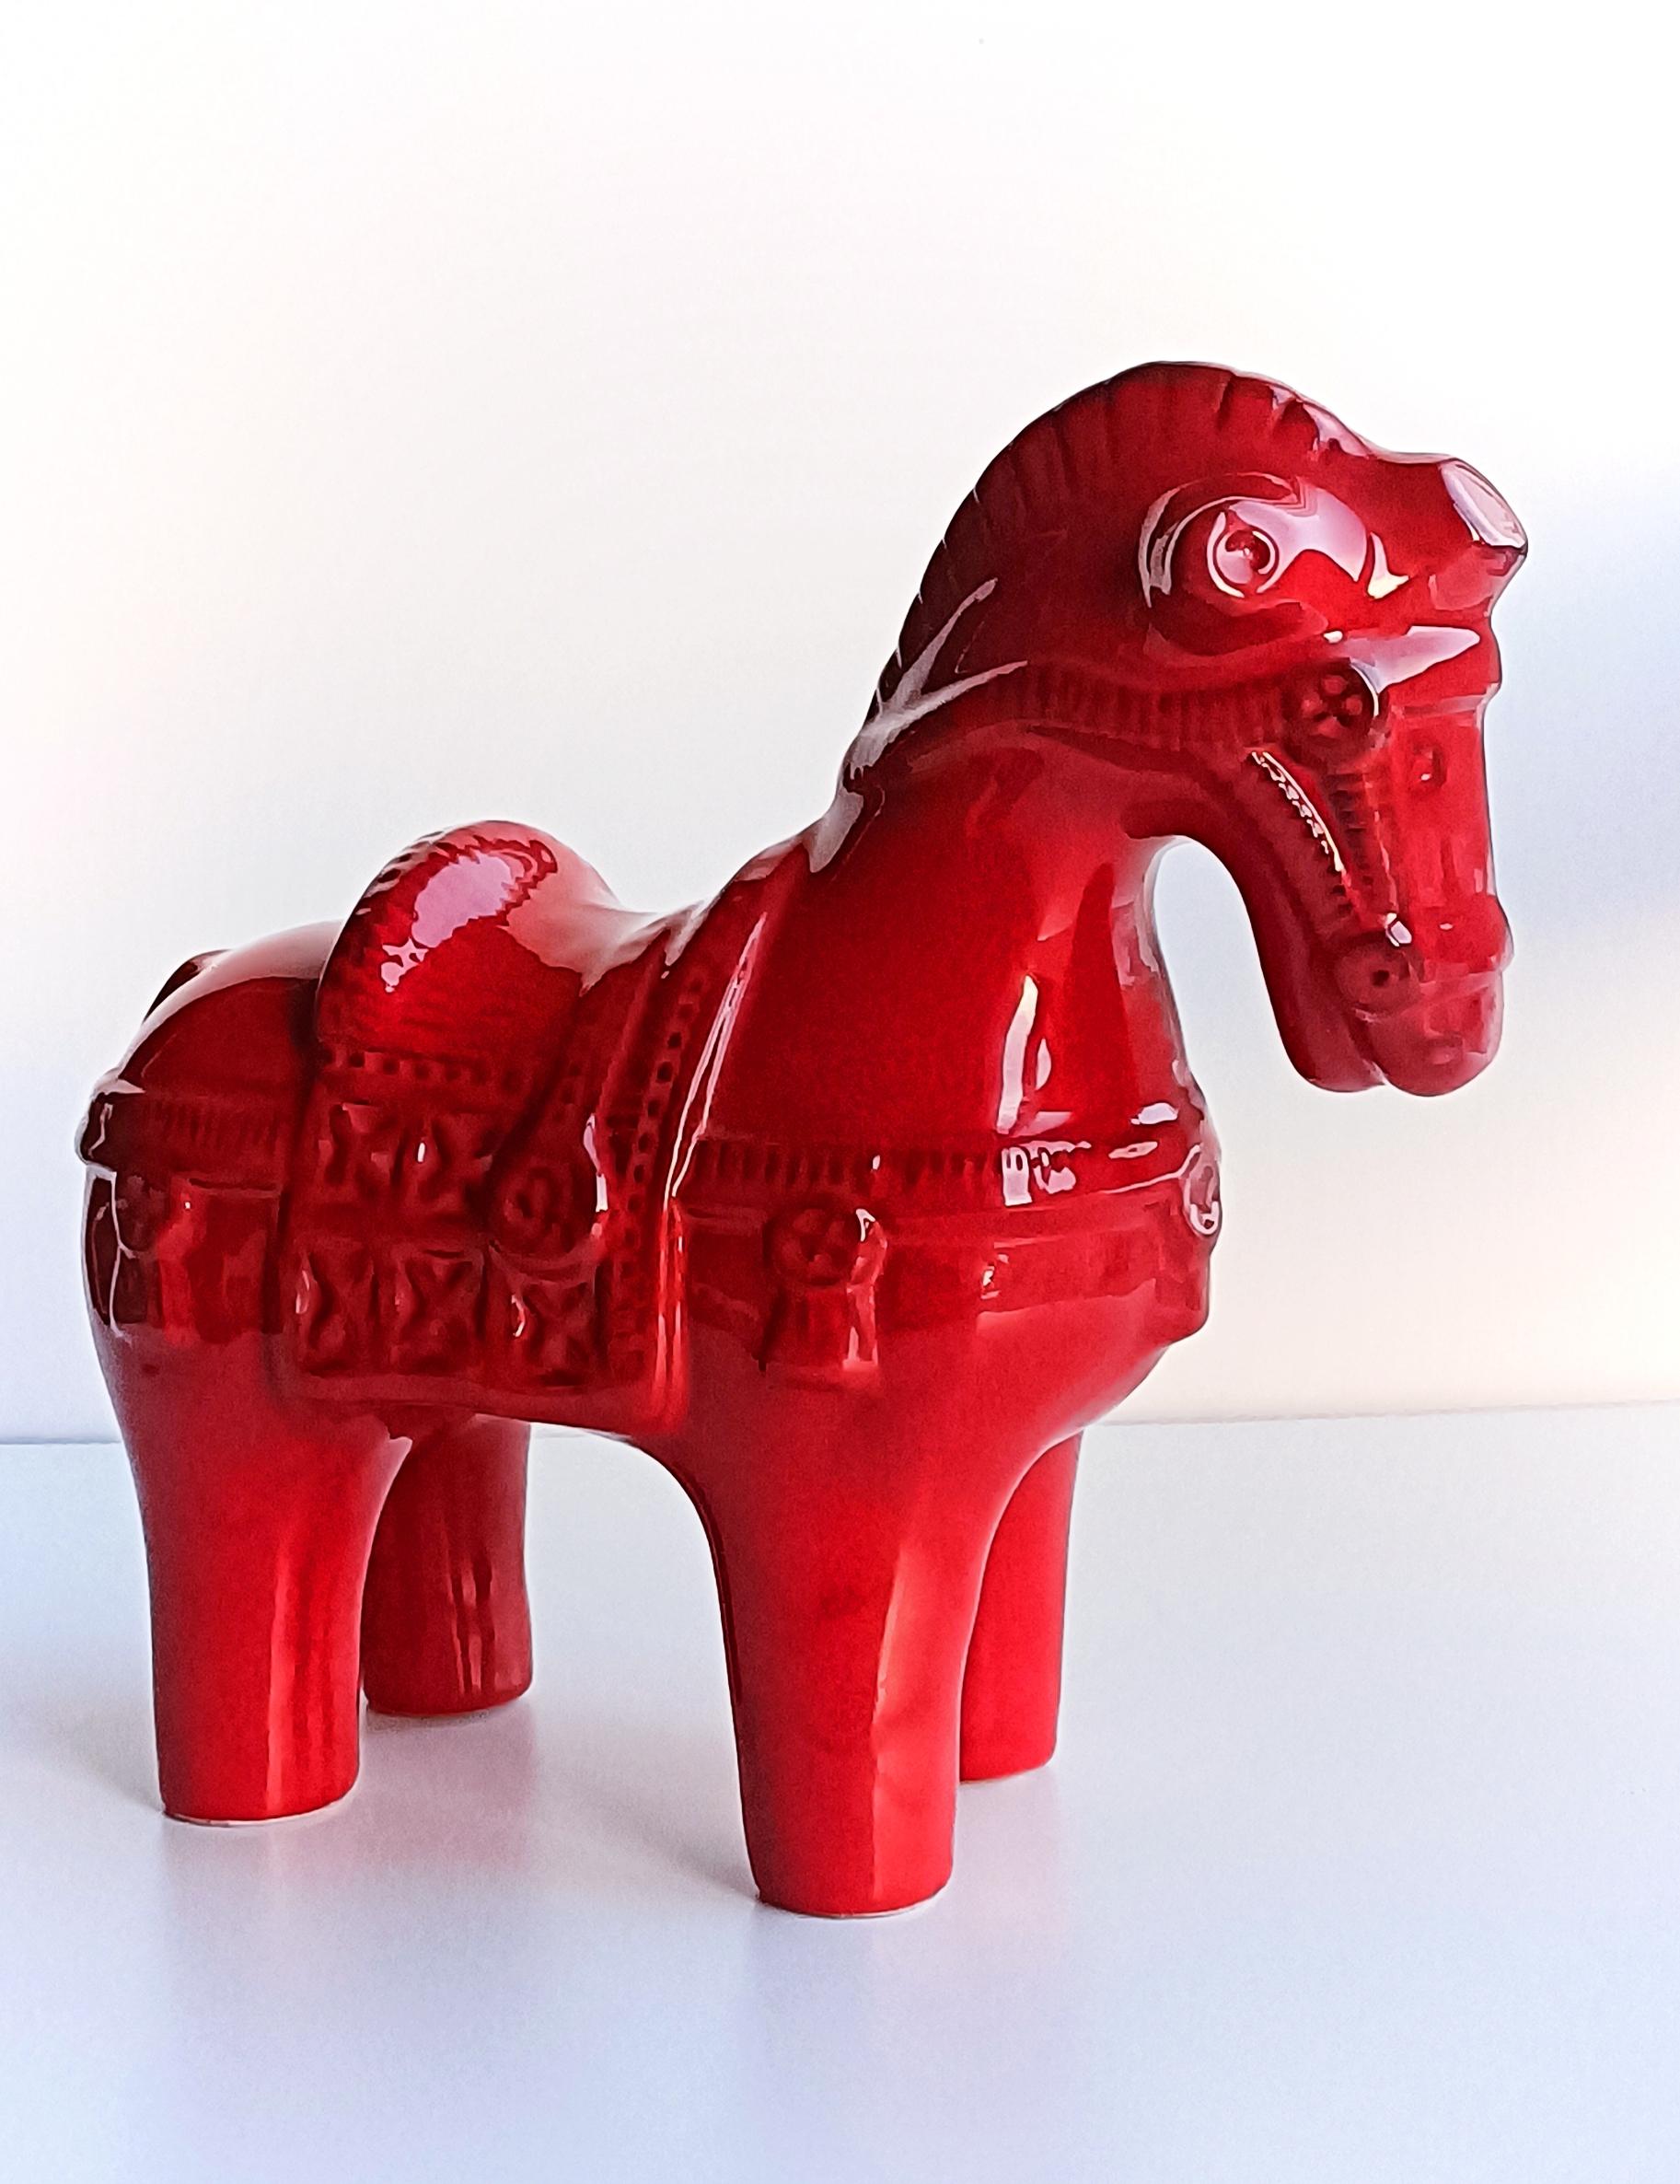 Red glaze ceramic horse sculpture by Aldo Londi for Bitossi. Large, beautiful, bold piece. In flawless condition. Stunning in the hand. Collector's piece. Produced in Flavia Montelupo, Italy, circa 1960s.

